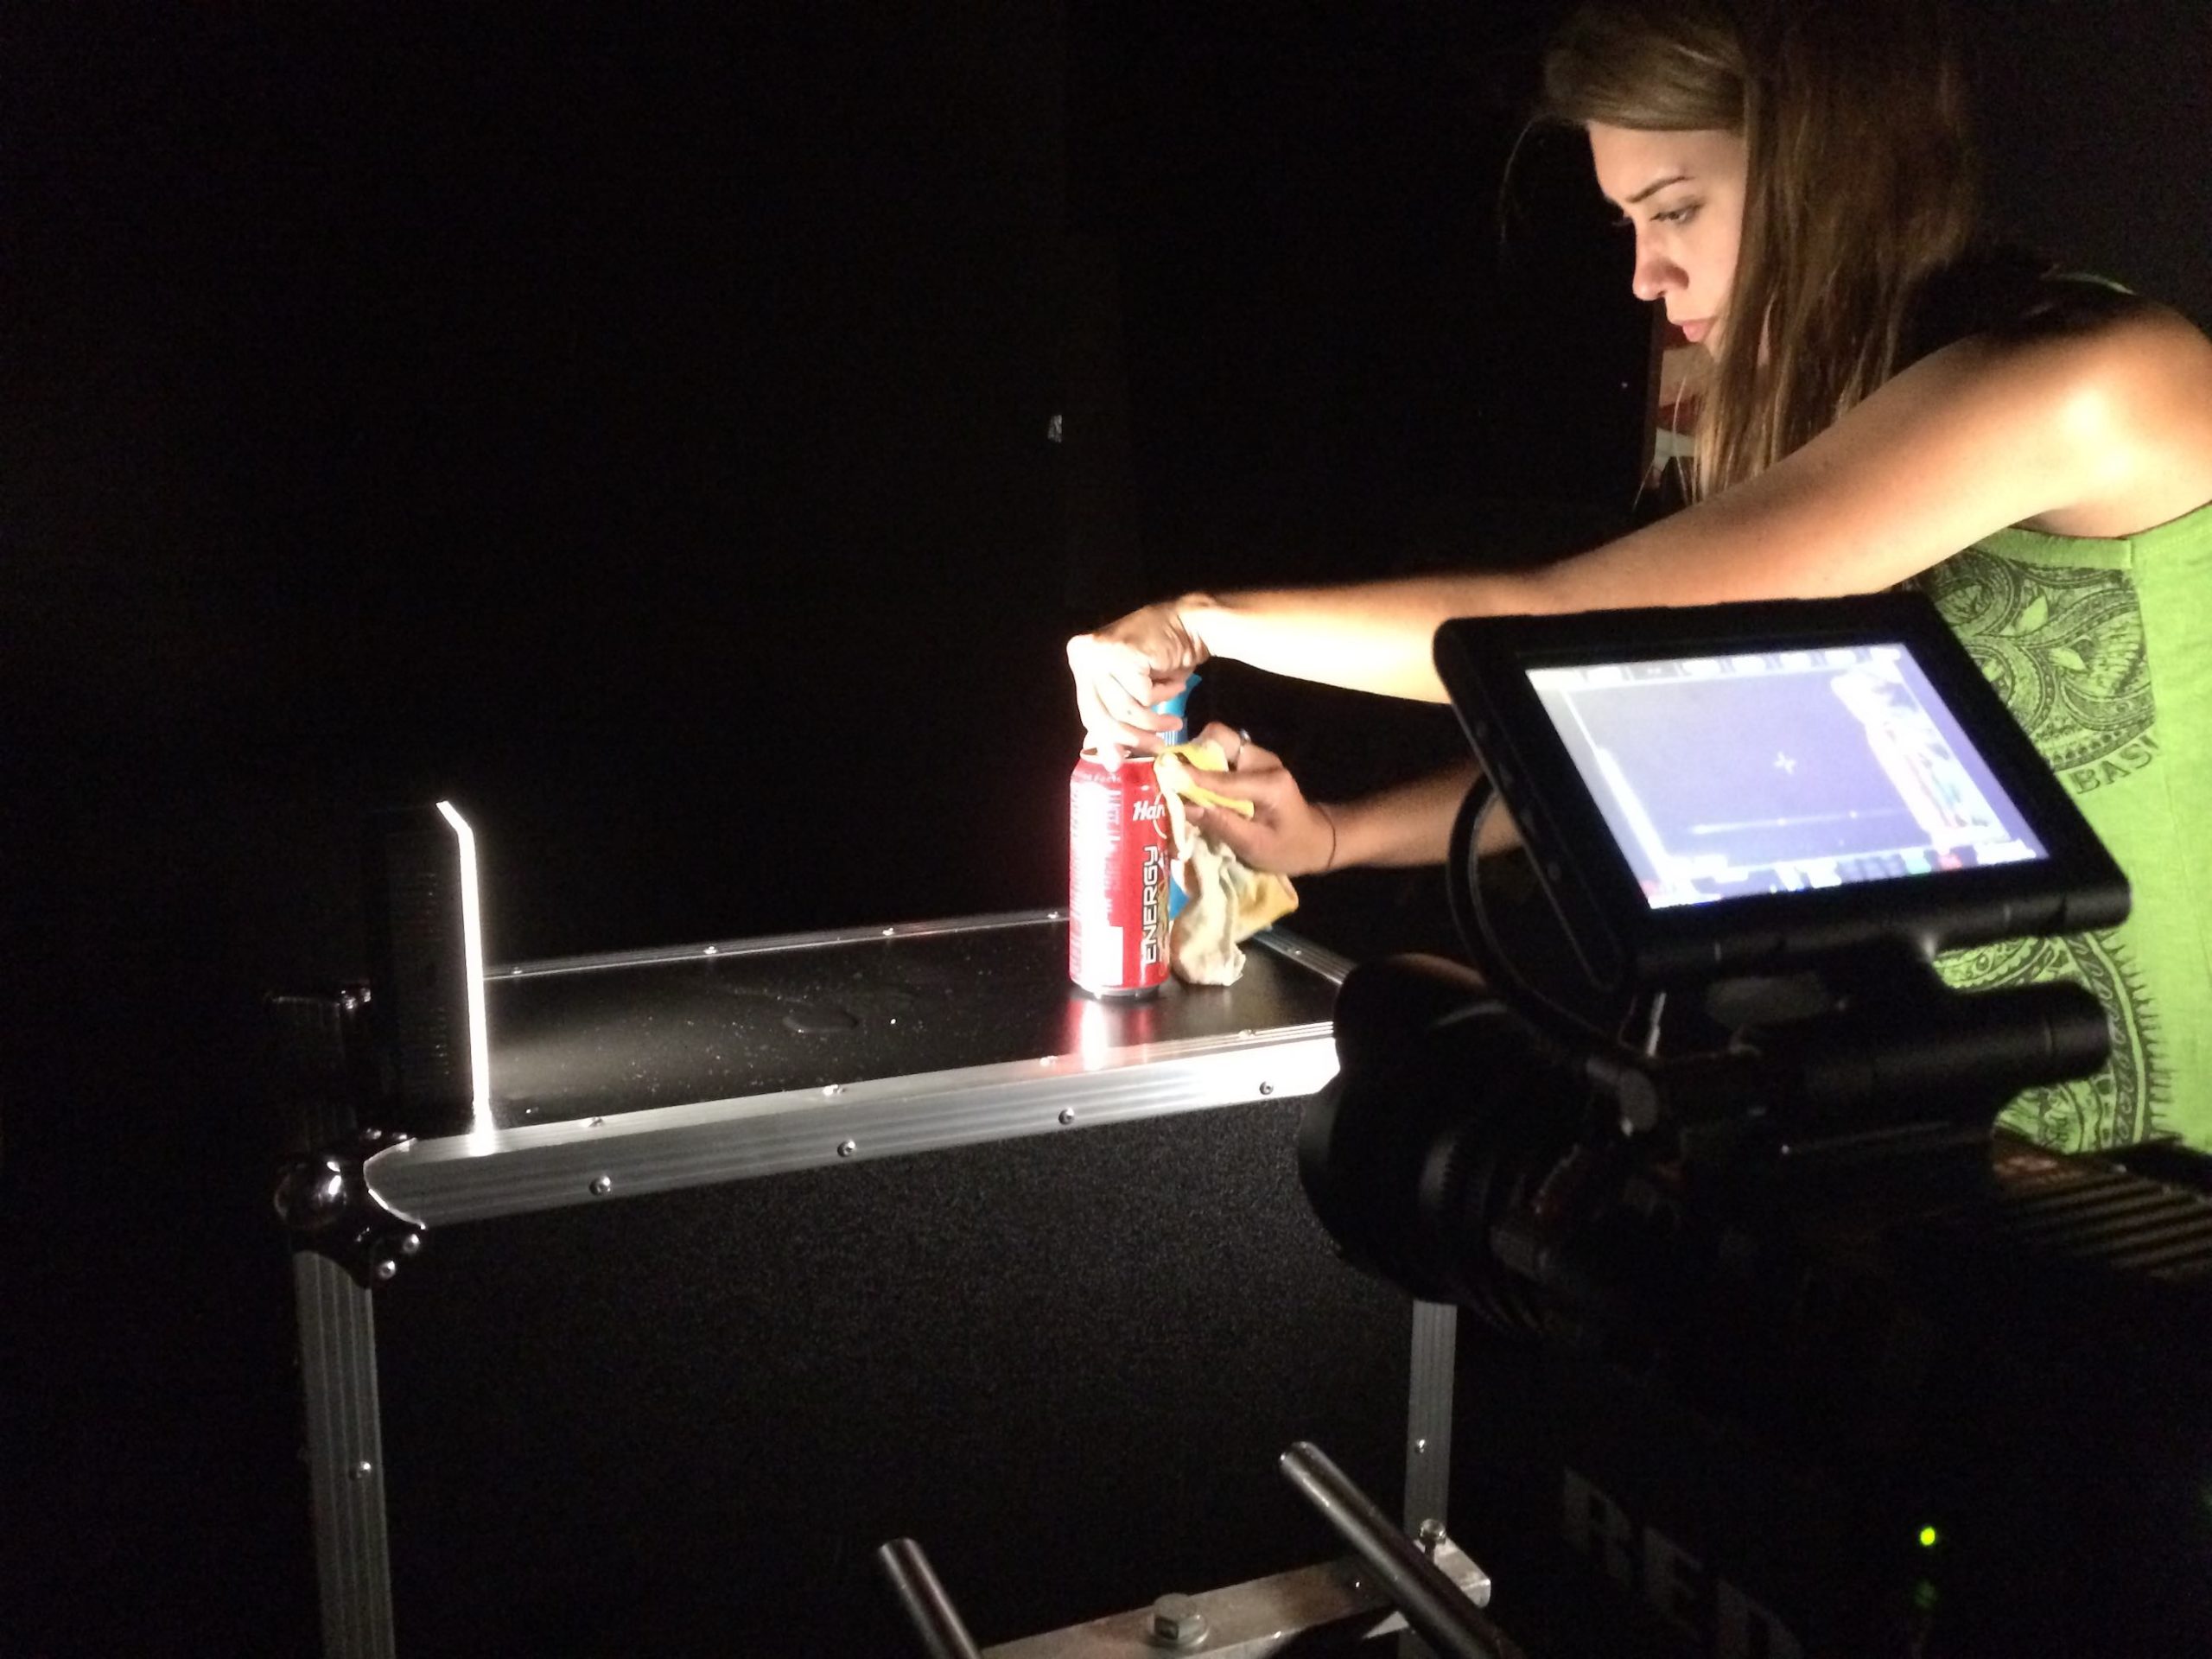 Woman opening a can of Hard Rock Energy drink surrounded by equipment